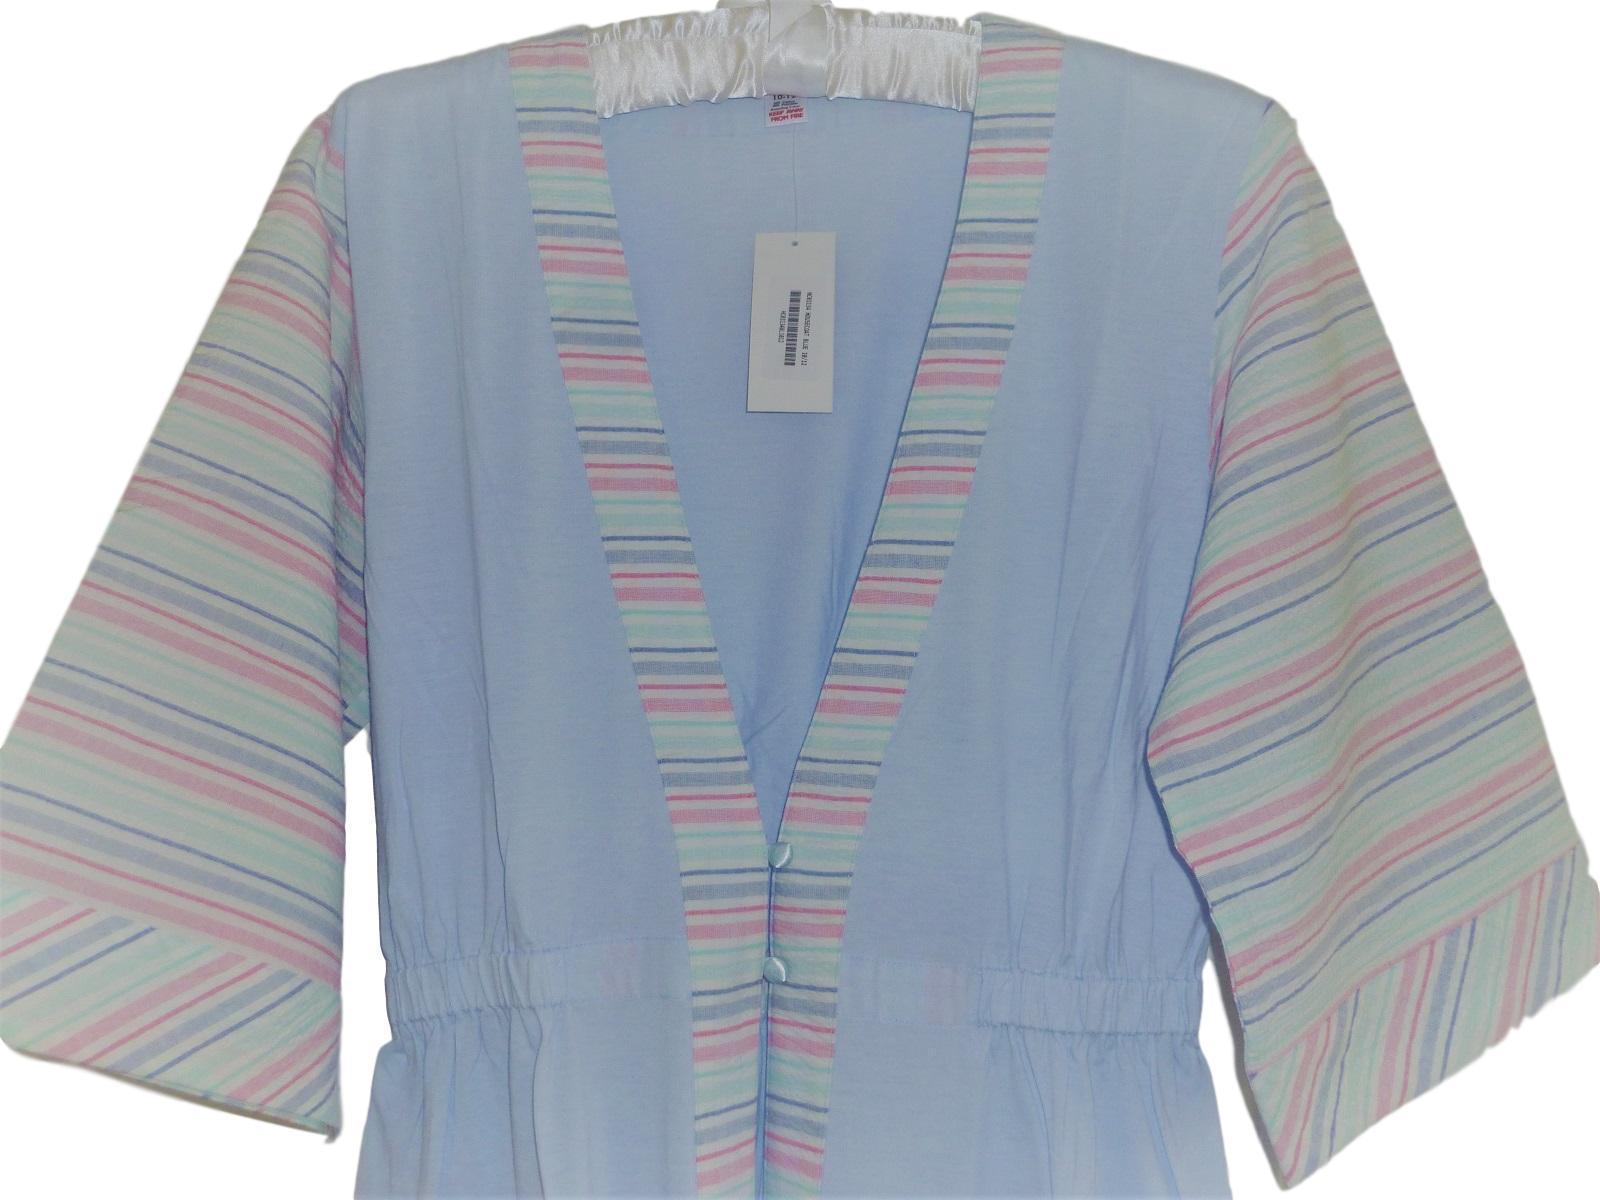 Slenderella Dressing Gown Cotton Blend Jersey with Cotton Stripe Contrast Housecoat - Blue or Pink